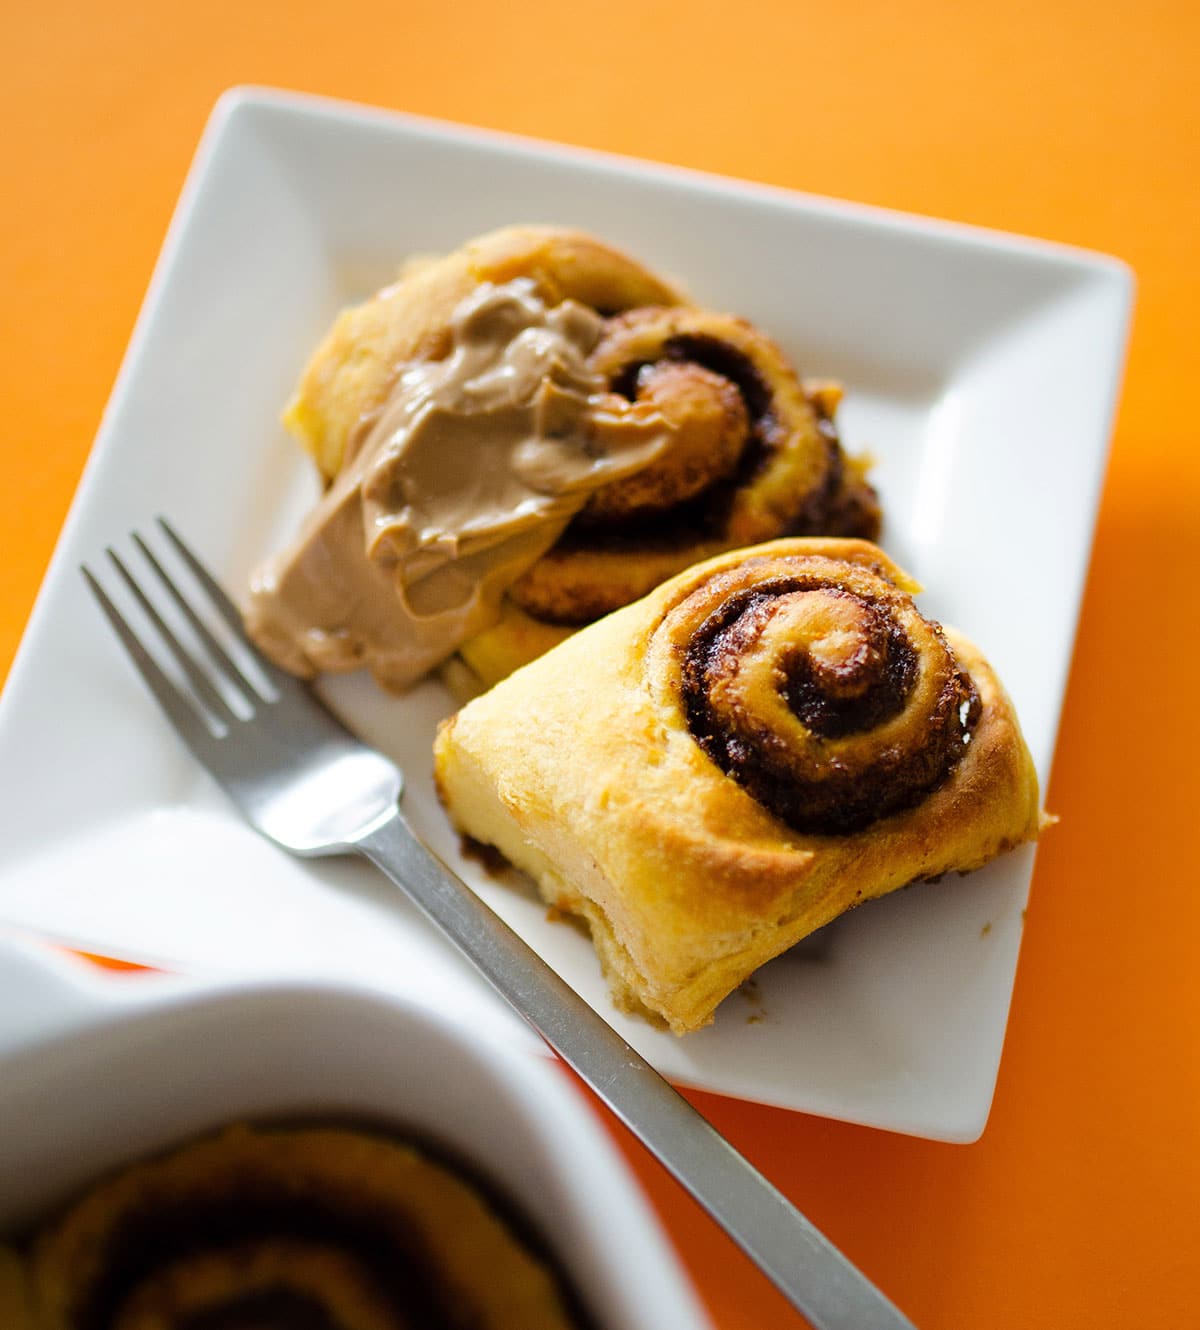 Cinnamon rolls on a plate with a fork - Fluffy, decadent, in slathered in a simple brown sugar cream cheese frosting, these Sweet Potato Cinnamon Rolls are the perfect way to wake up.